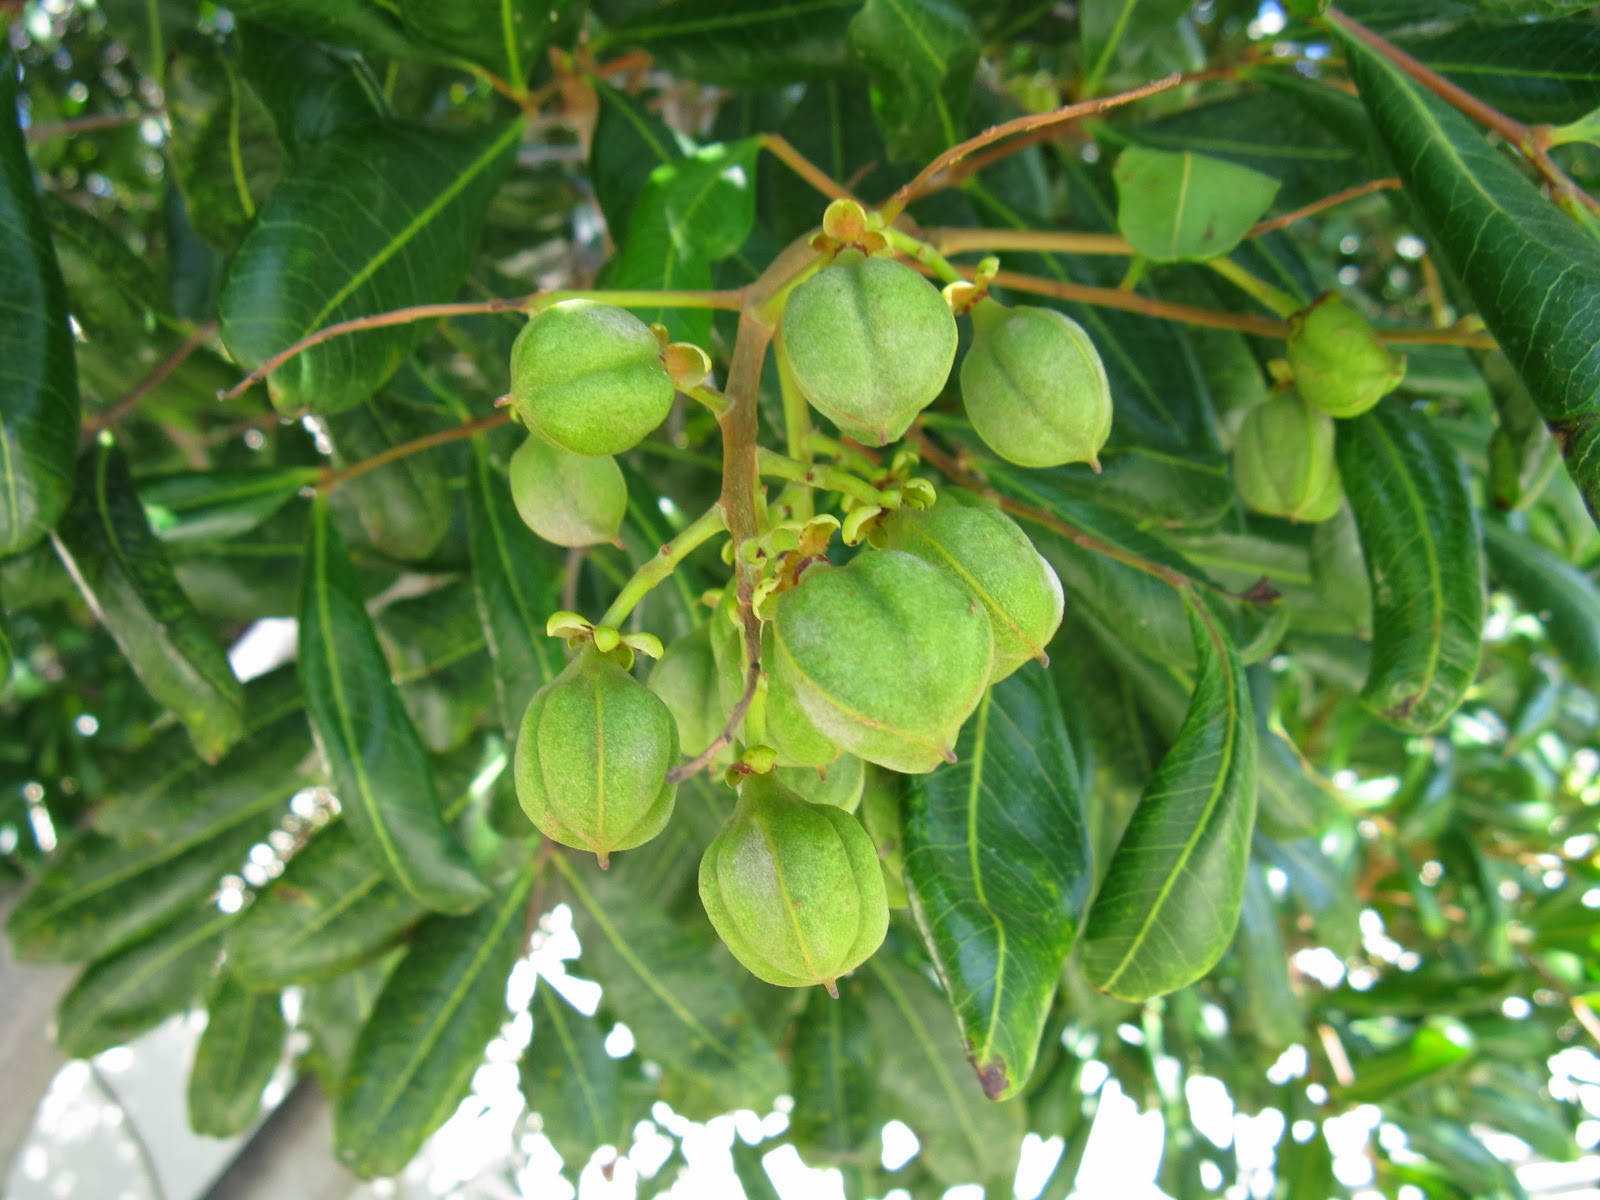 What is this Florida tree/plant with green fruits and cuneate leaves ...